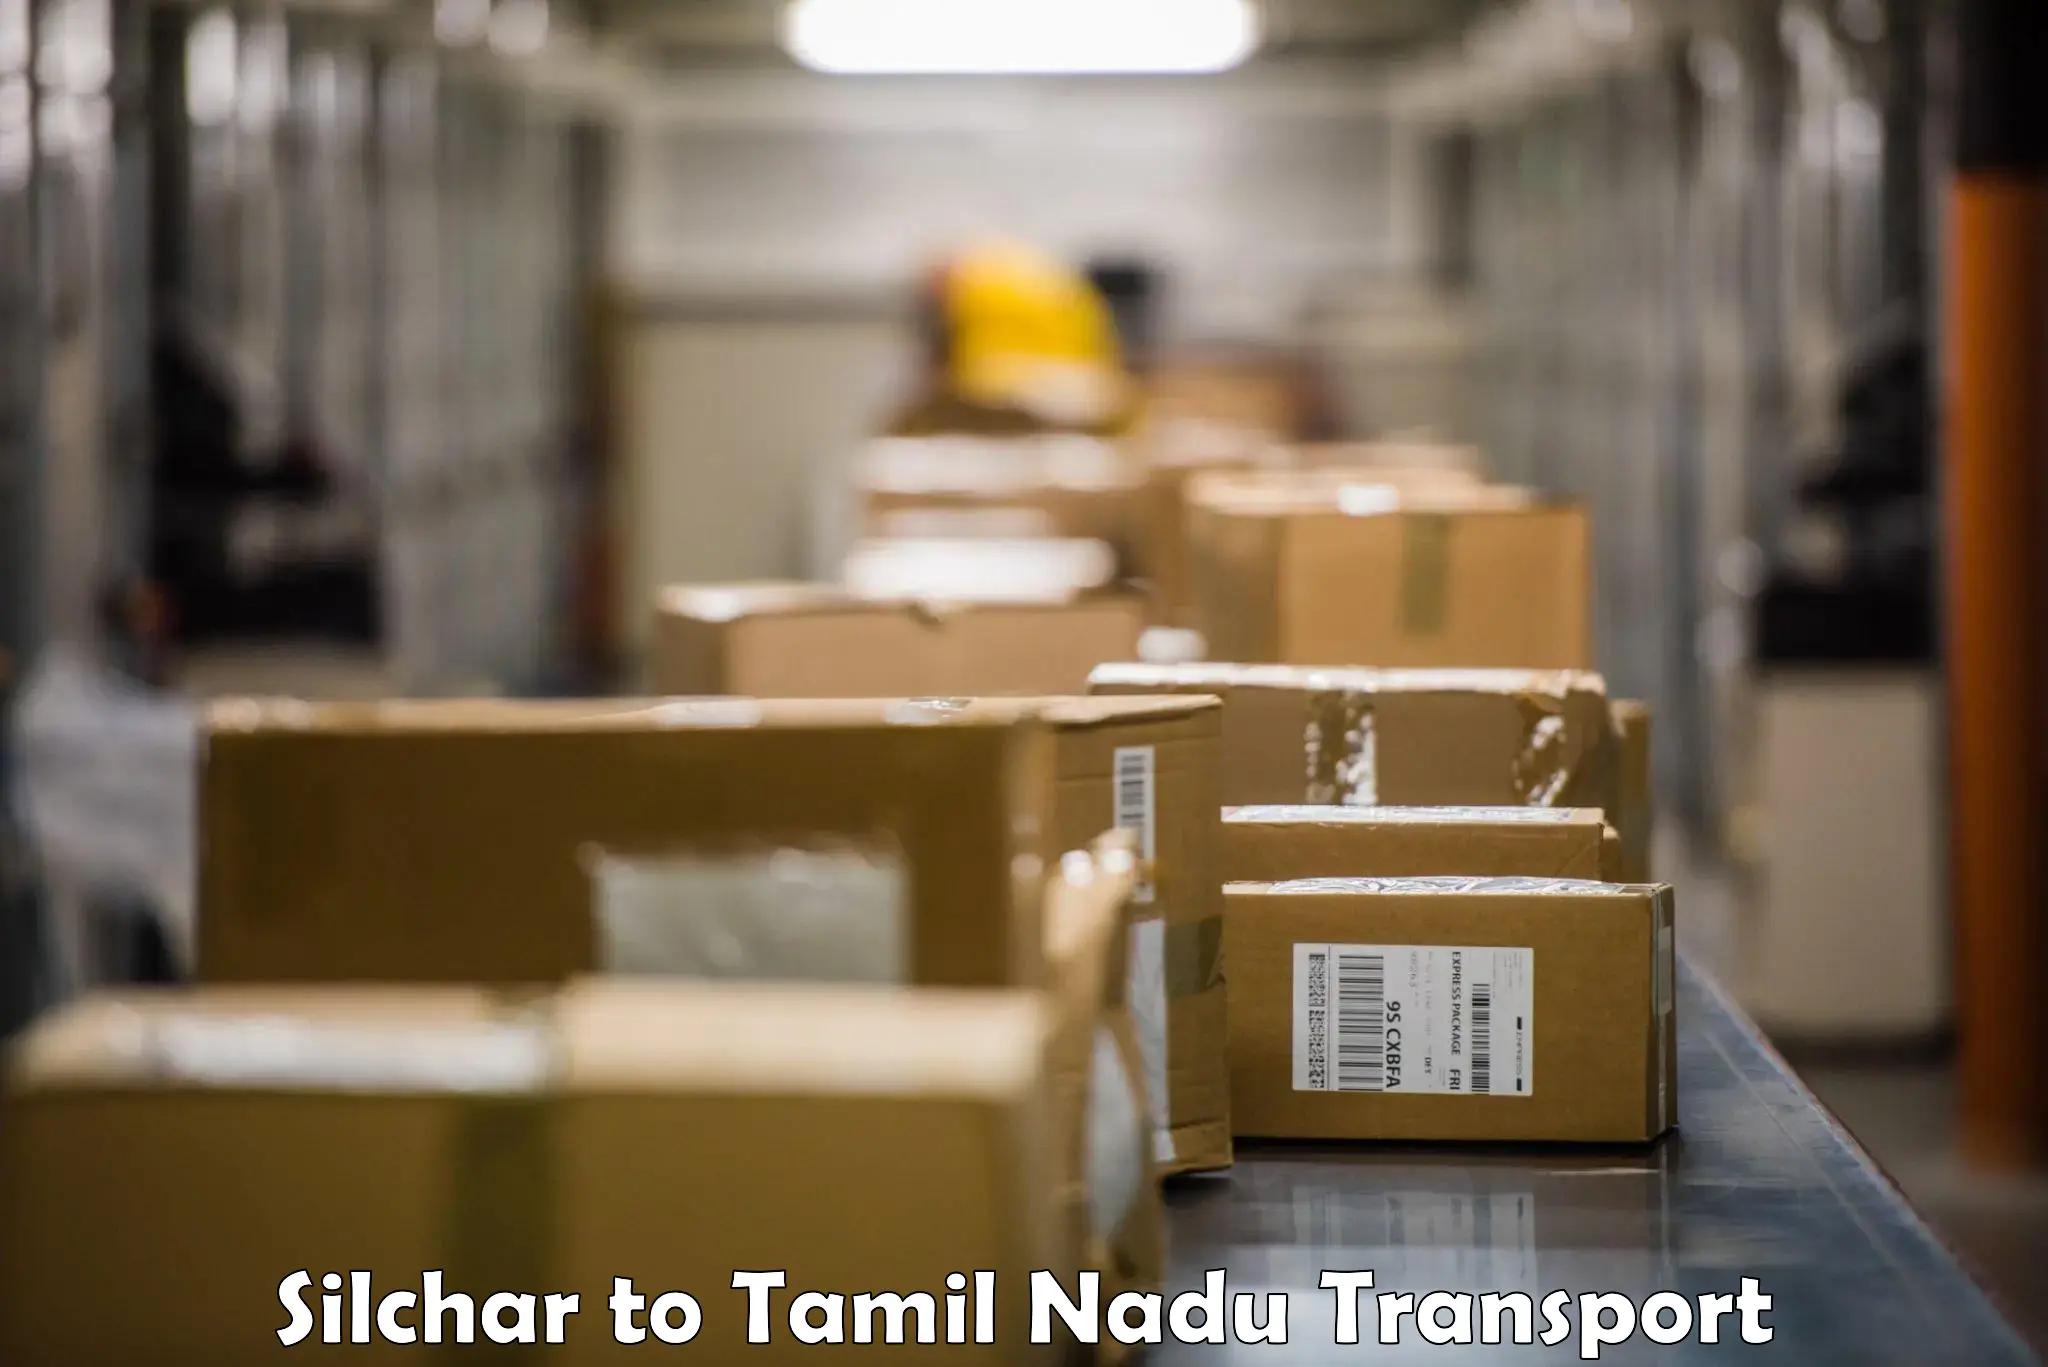 Shipping services Silchar to Sri Ramachandra Institute of Higher Education and Research Chennai